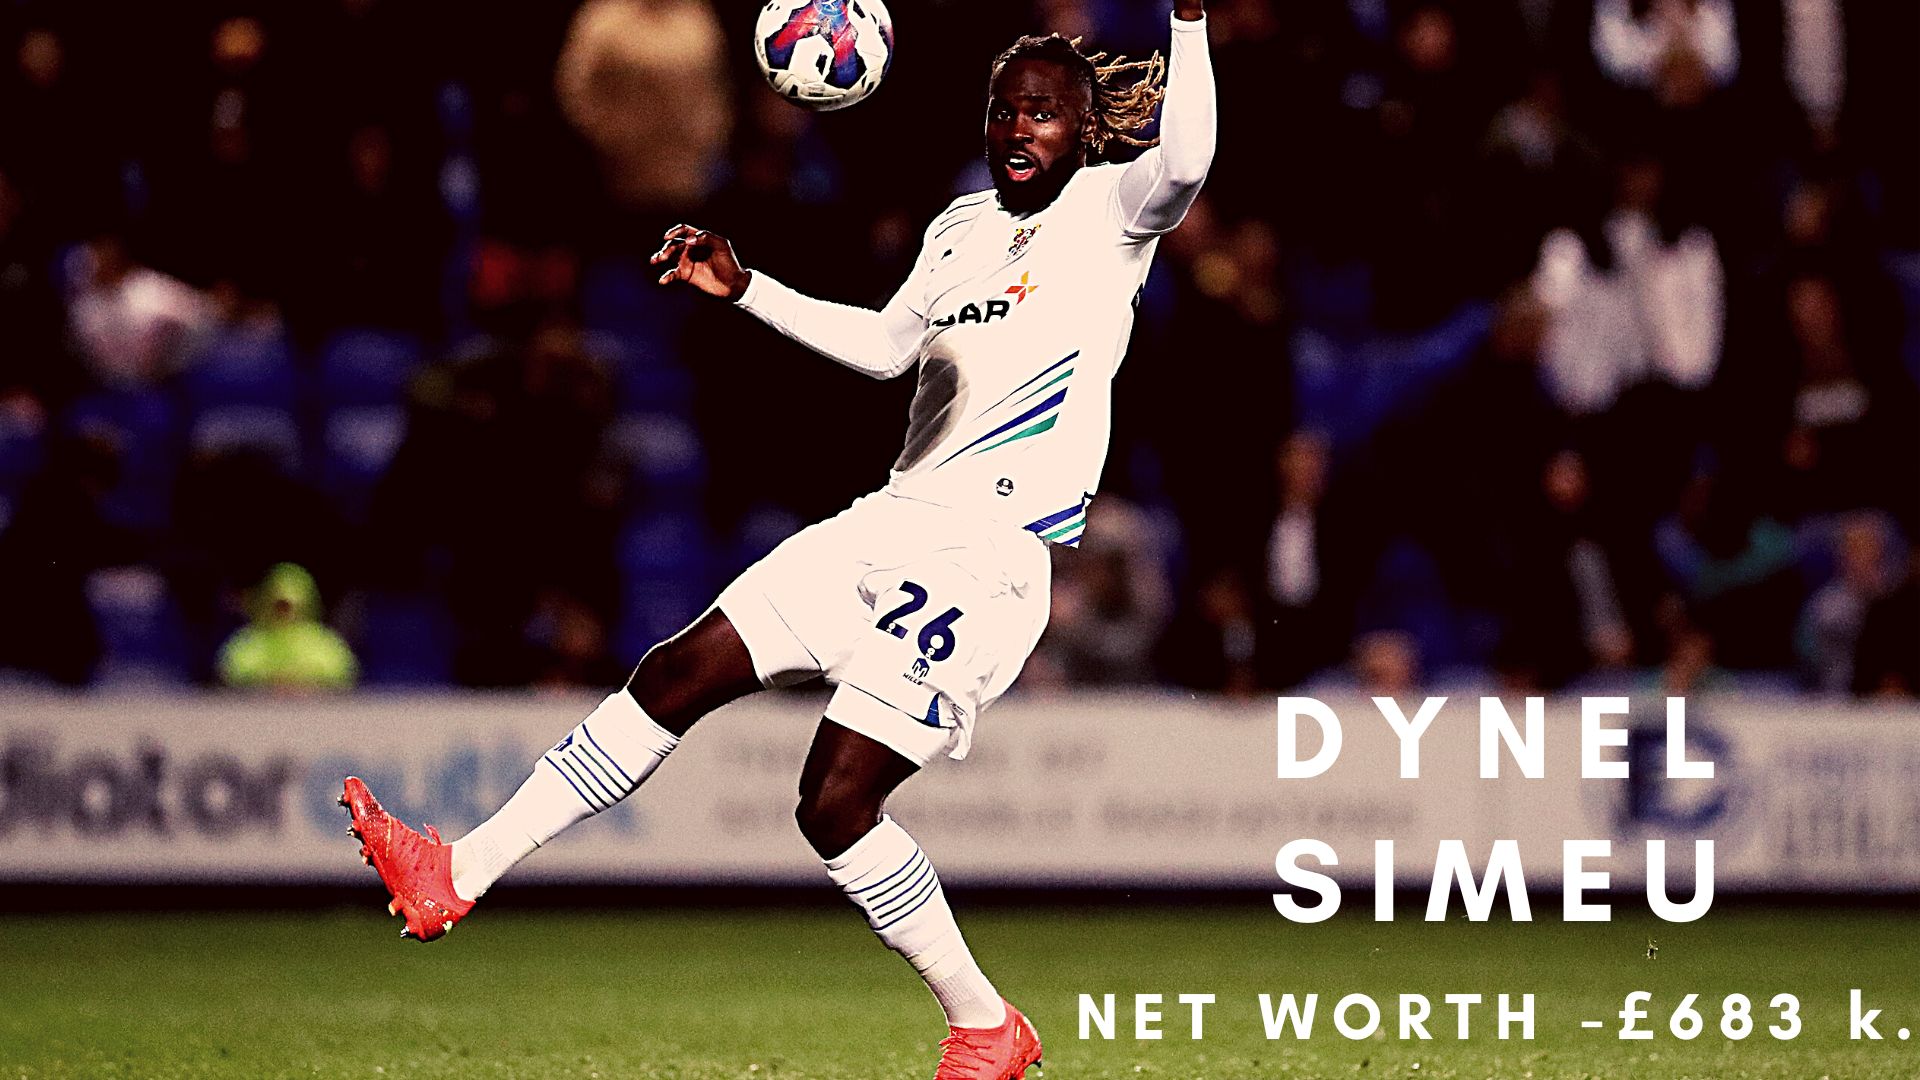 Dynel Simeu of Tranmere Rovers.